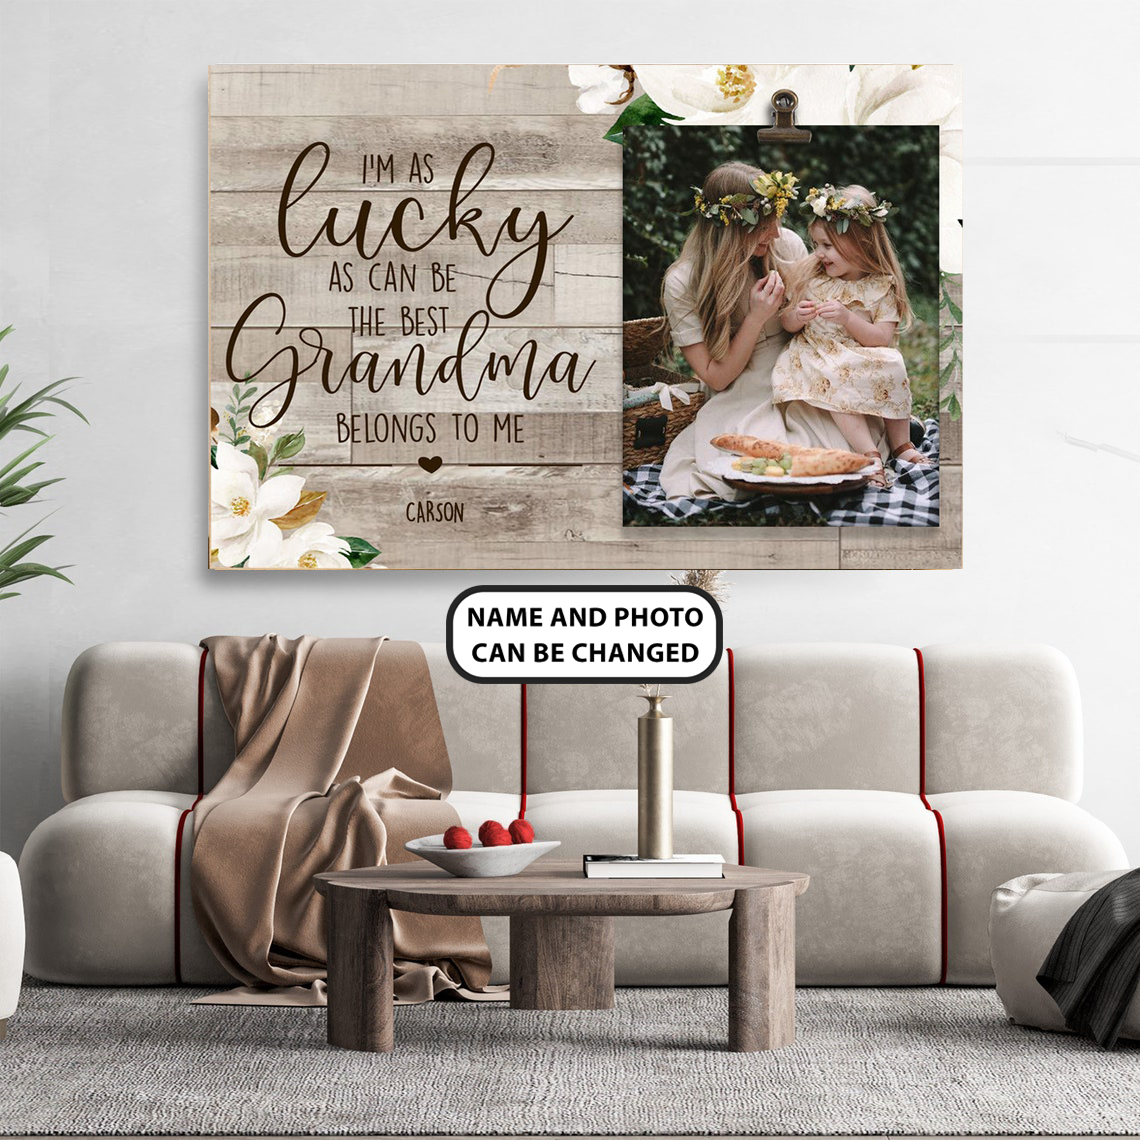 PresentsPrints, Mothers, I'm as lucky as can be the best Grandma belongs to me, Personalized Canvas, Mother's Day Gift